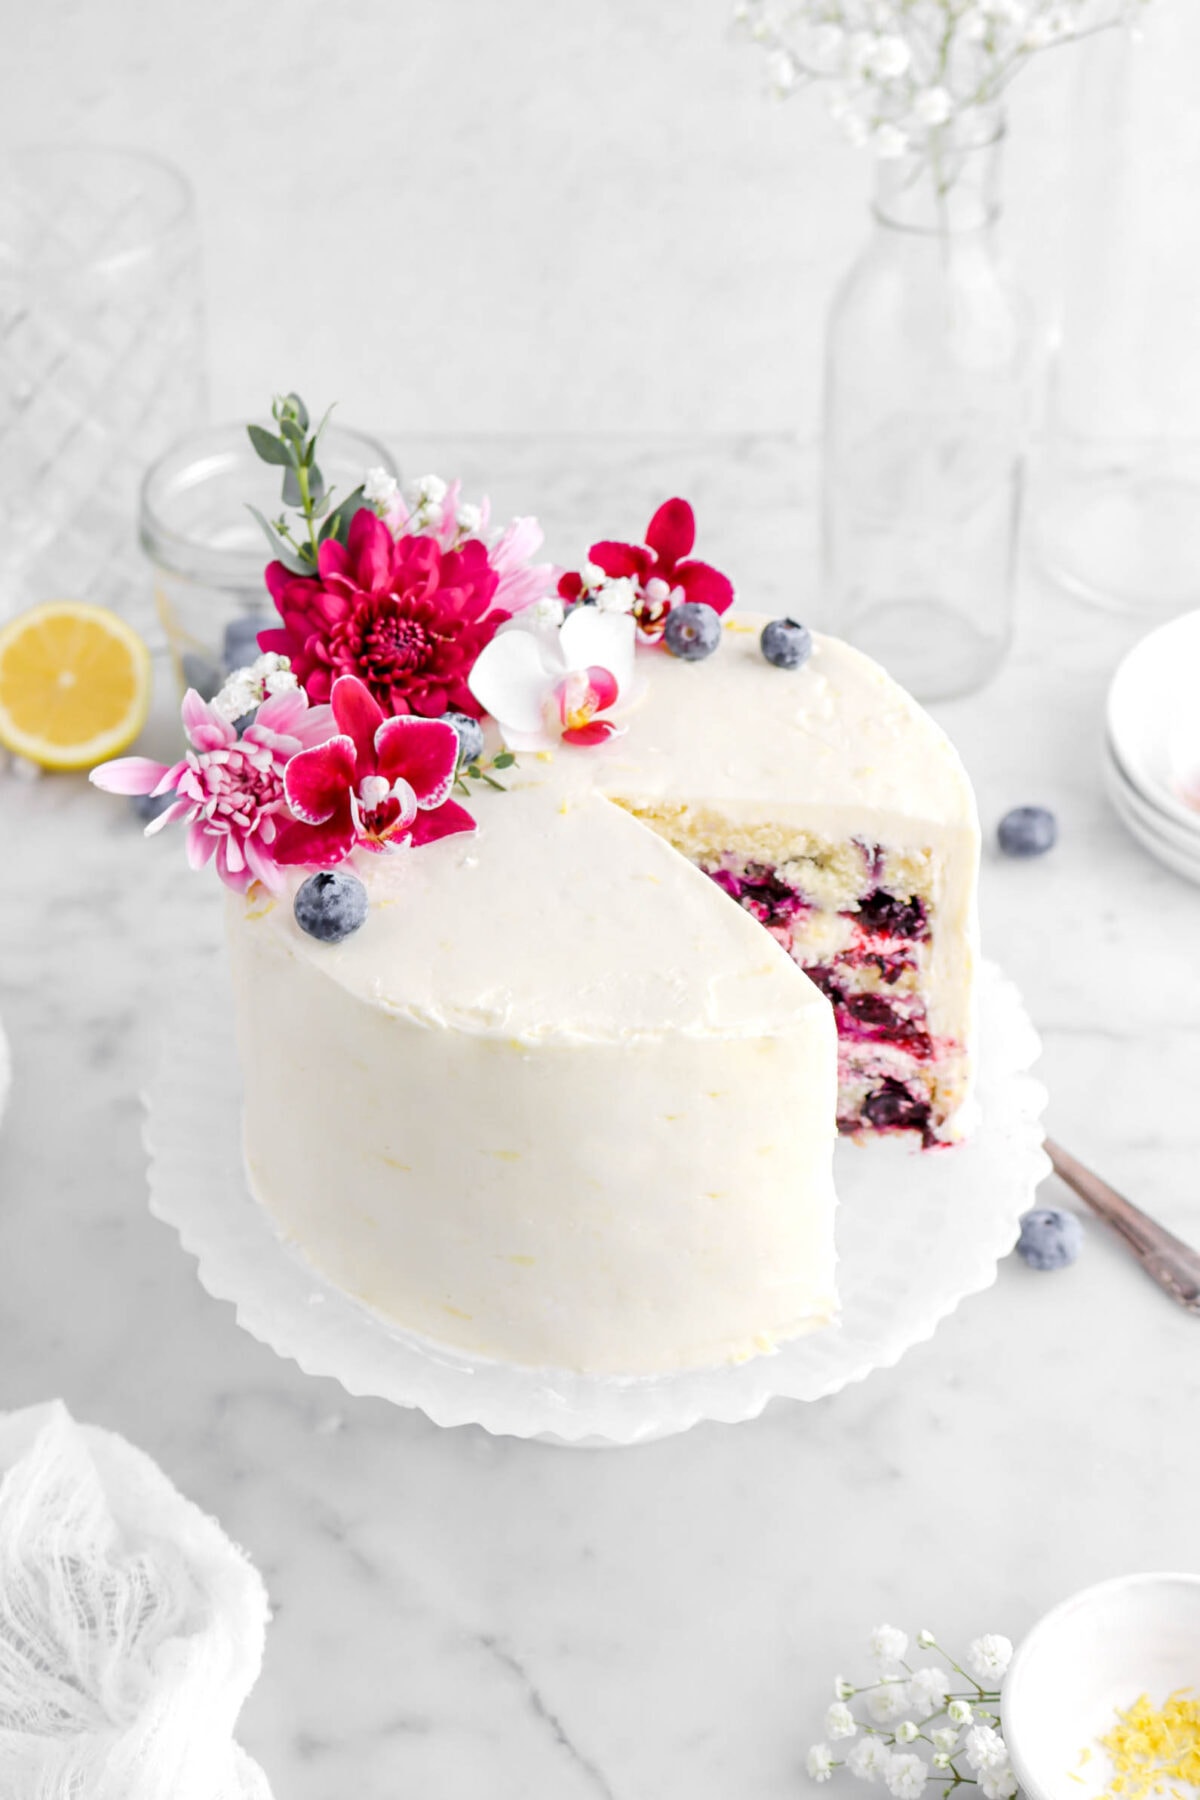 angled close up of lemon blueberry layer cake decorated with flowers on top with lemon half and empty glass behind on marble surface.